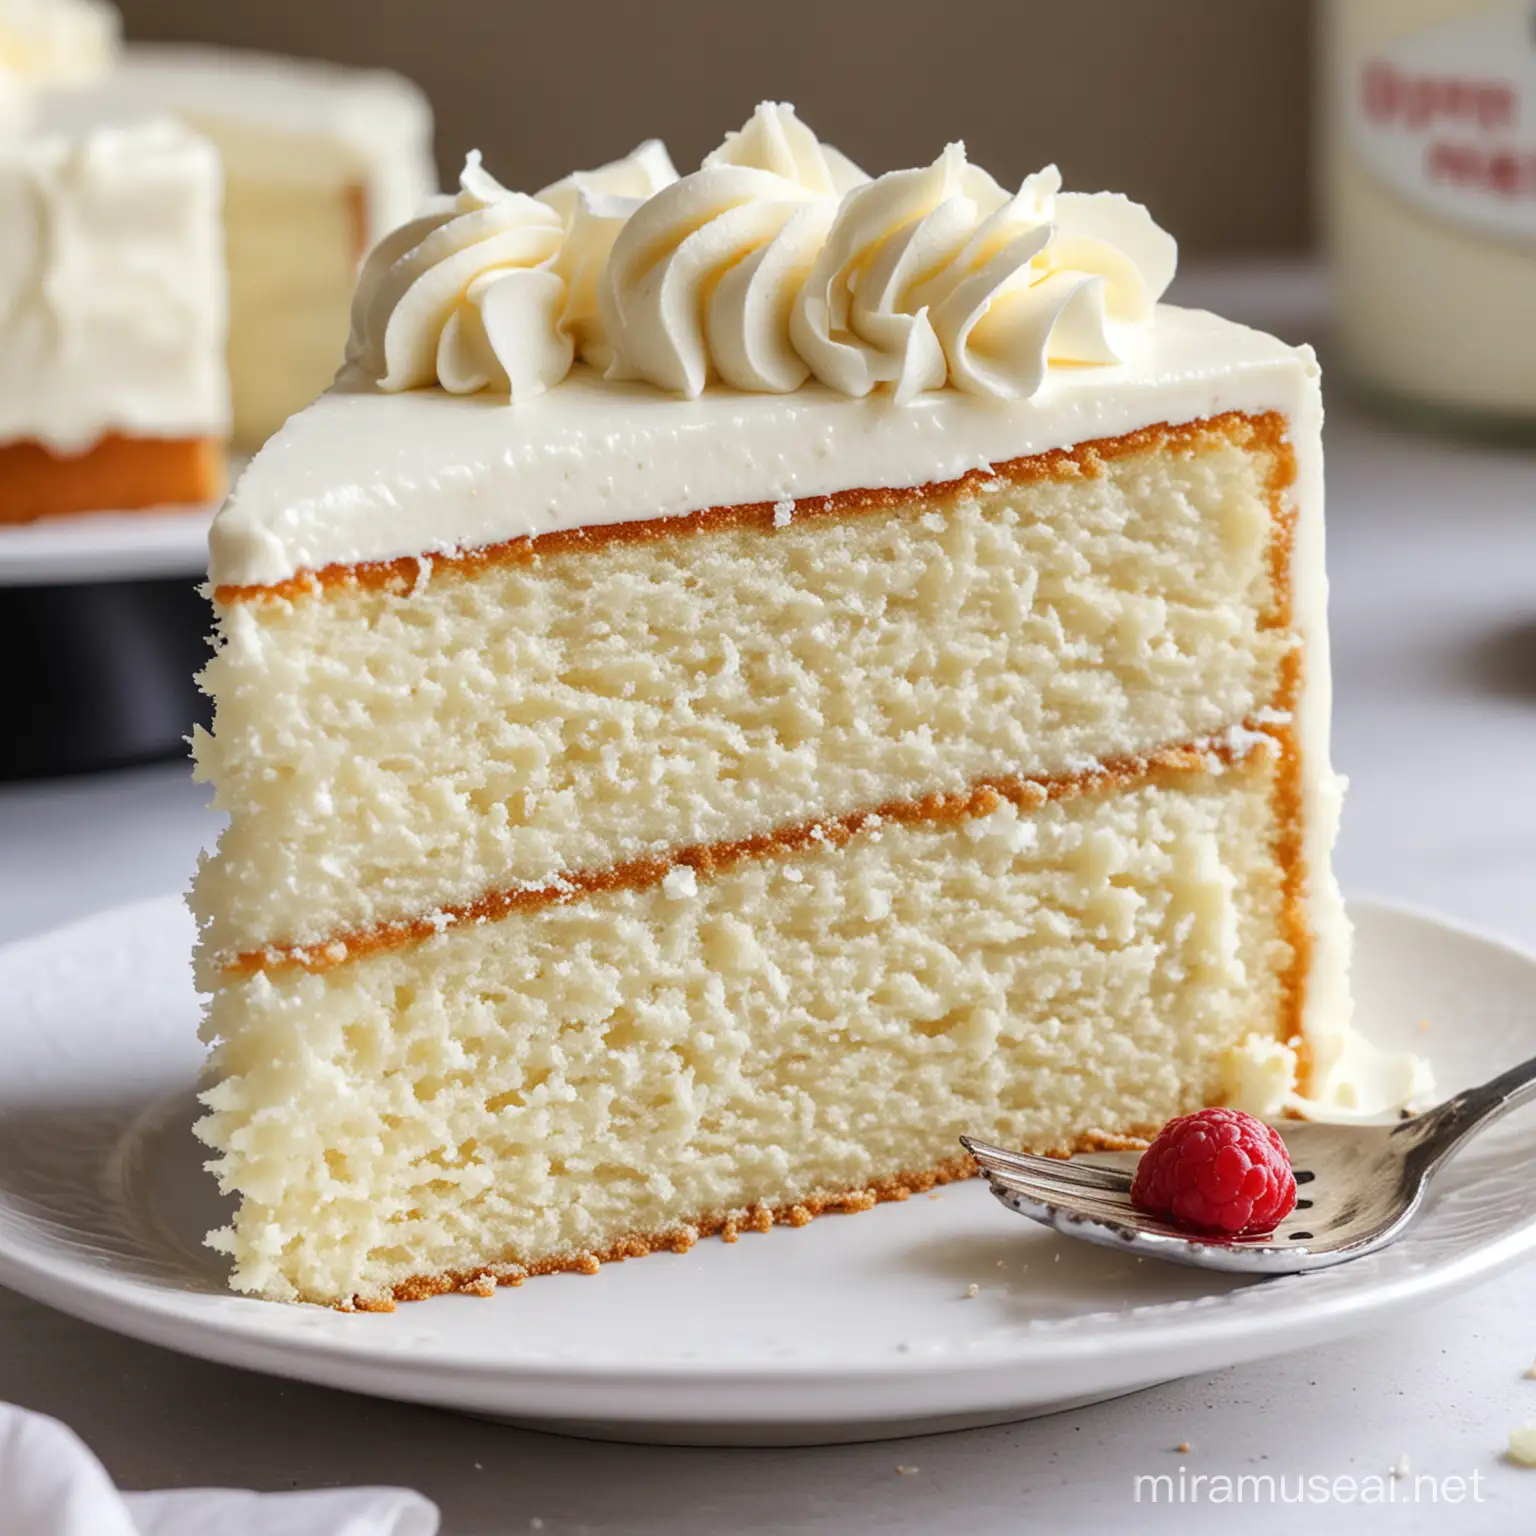 Irresistible Moist Vanilla Cake with Whipped Cream Topping